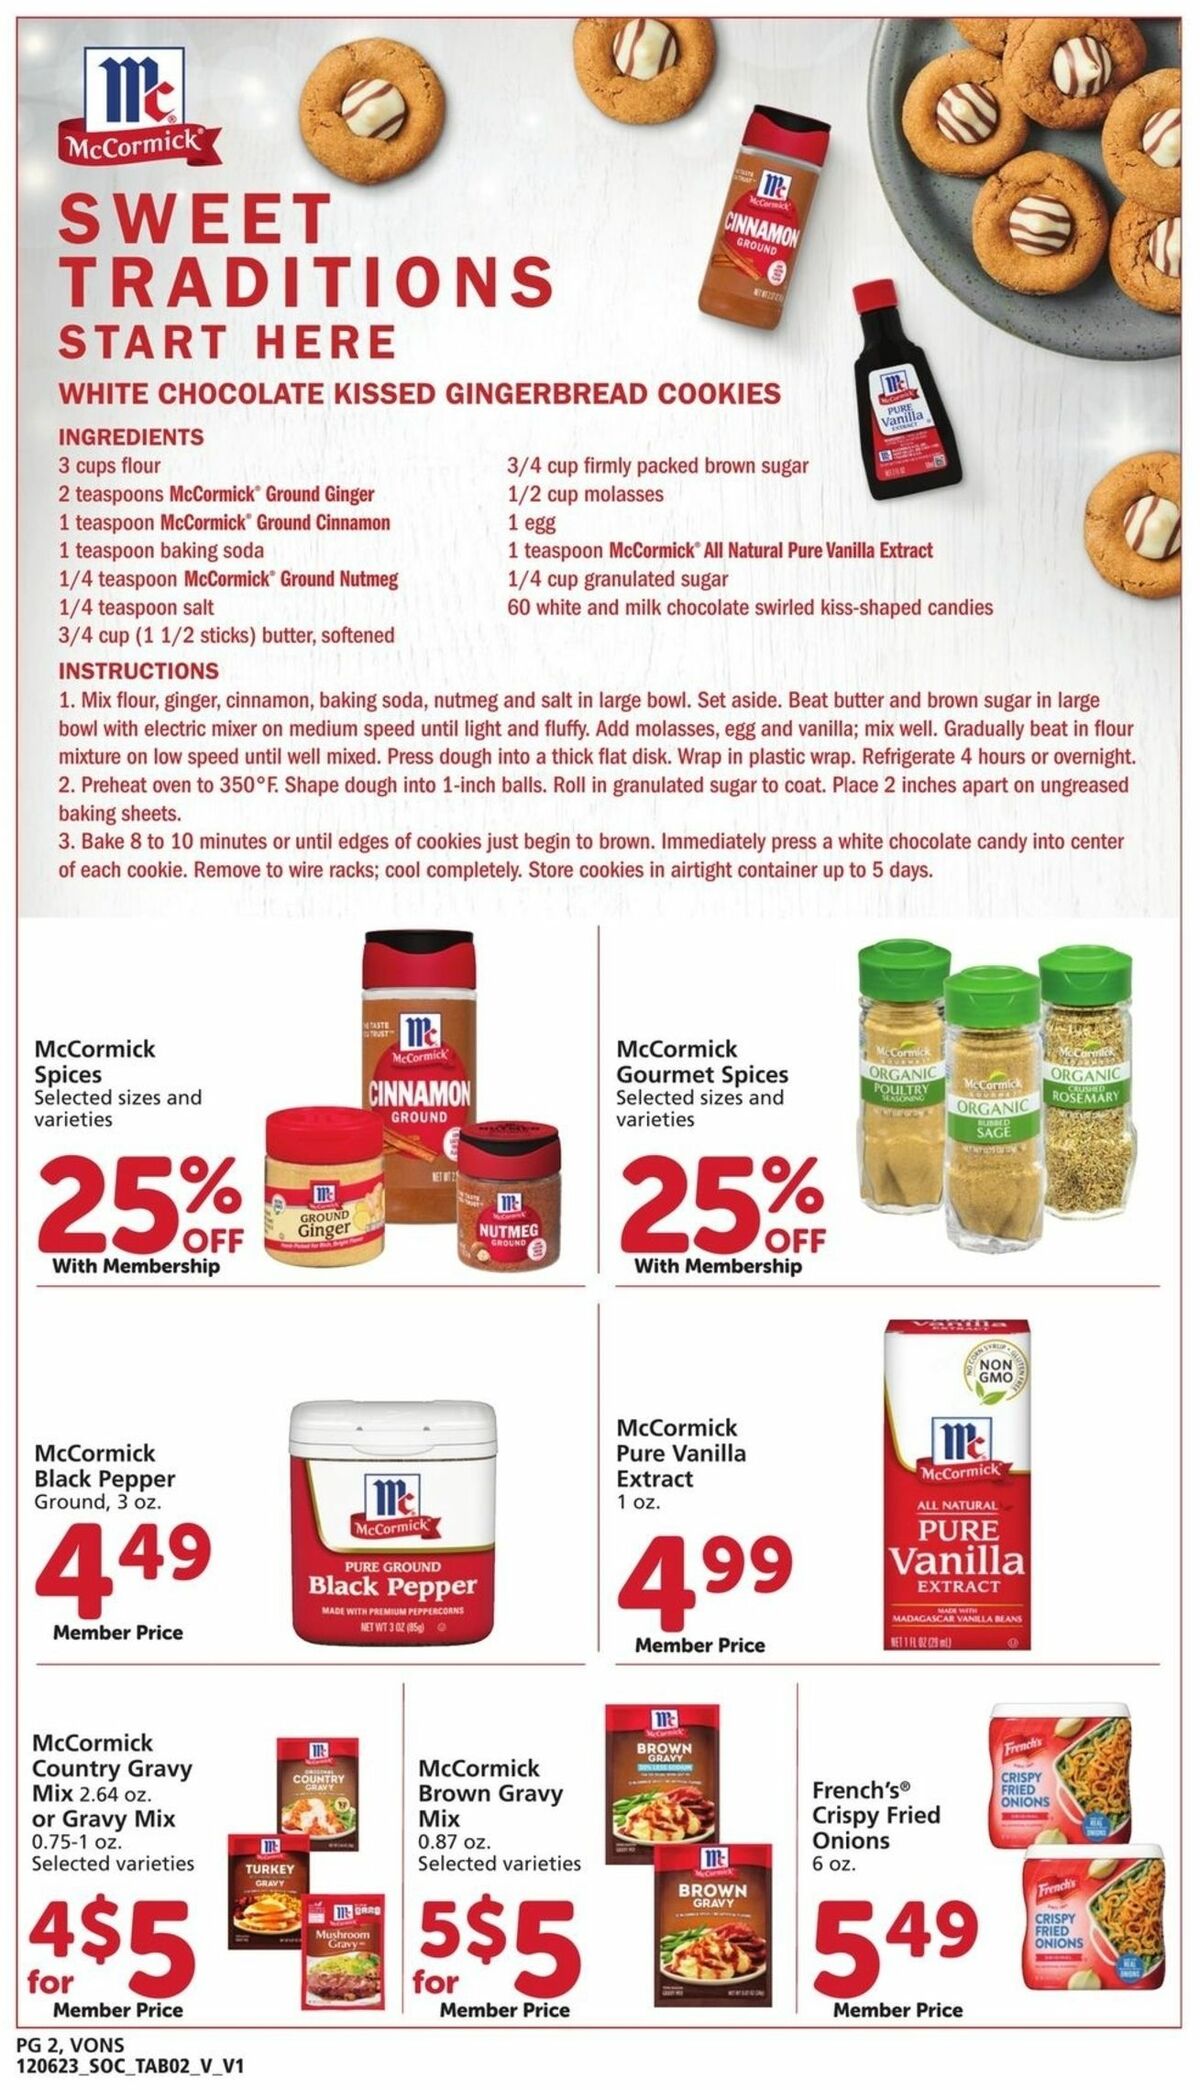 Vons Big Book of Savings Weekly Ad from December 6